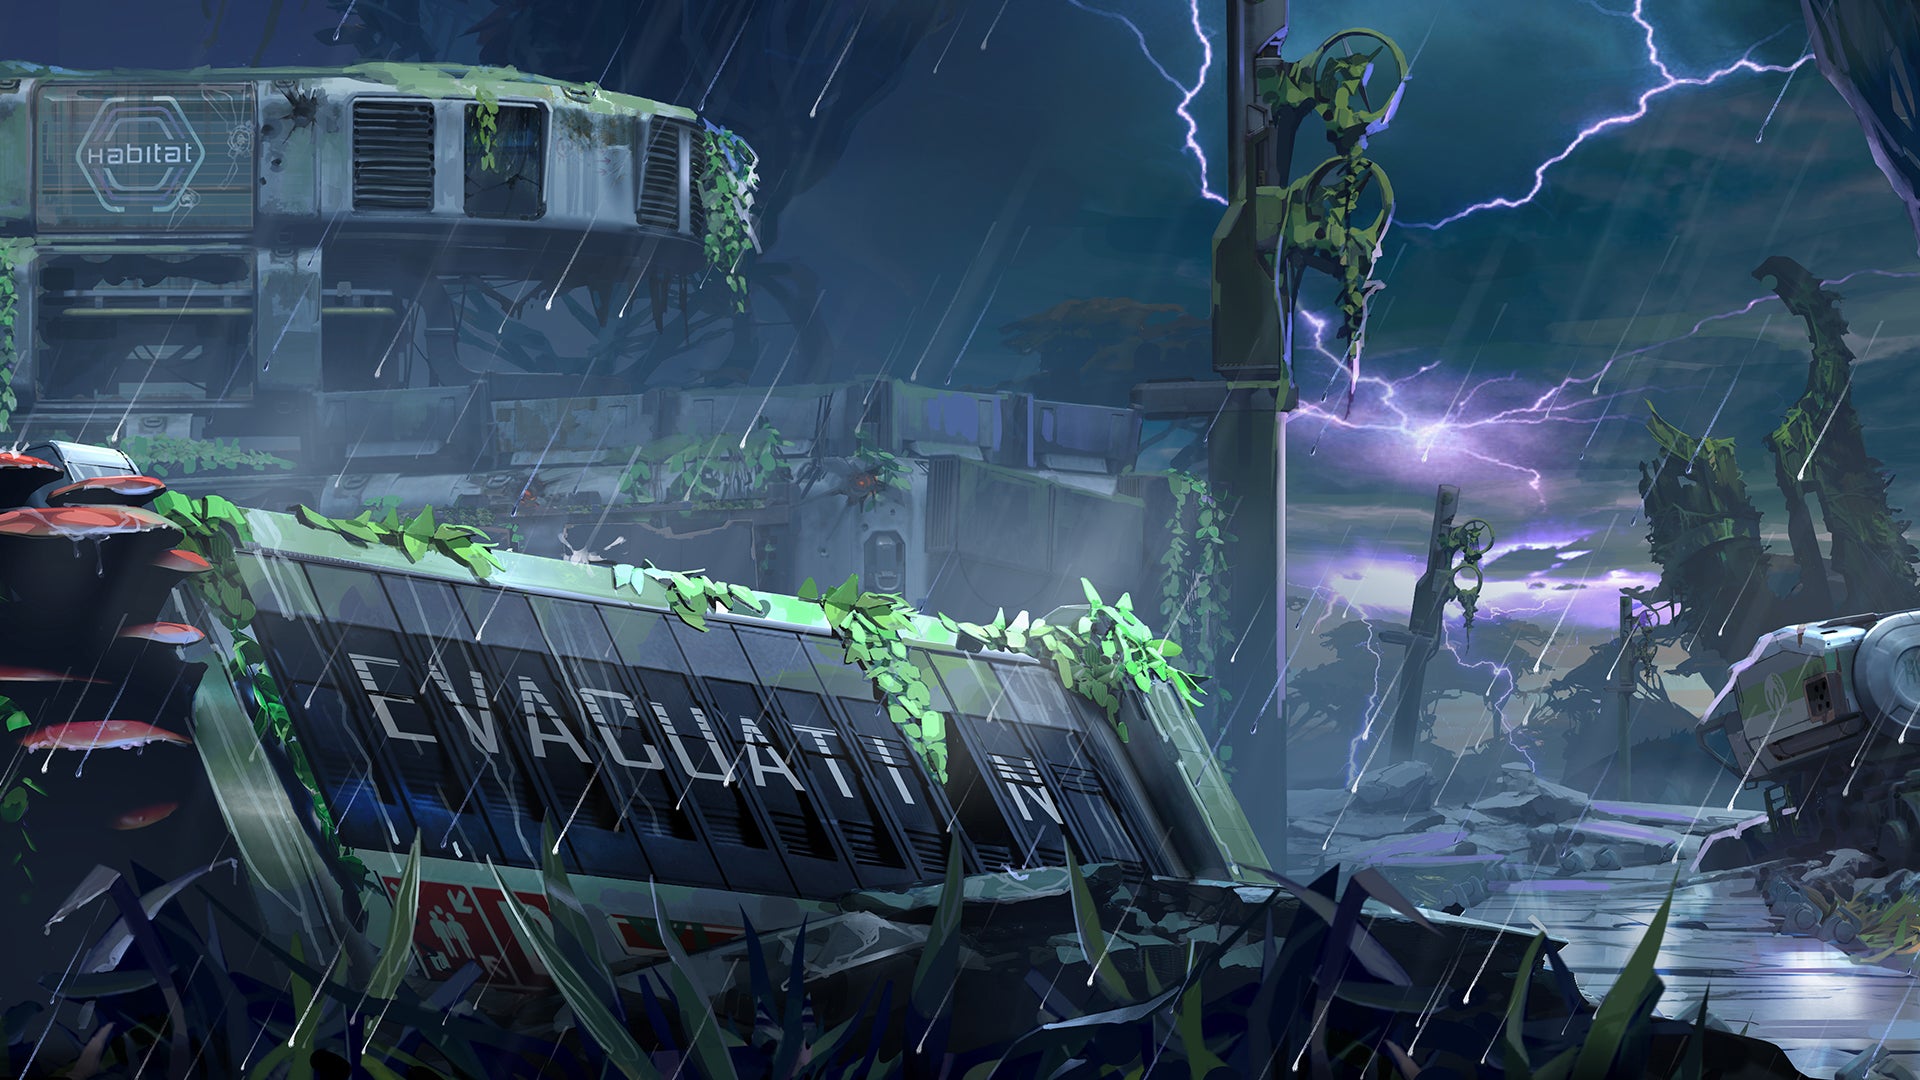 Concept art for The Cycle: Frontier depicting an overgrown habitat station.